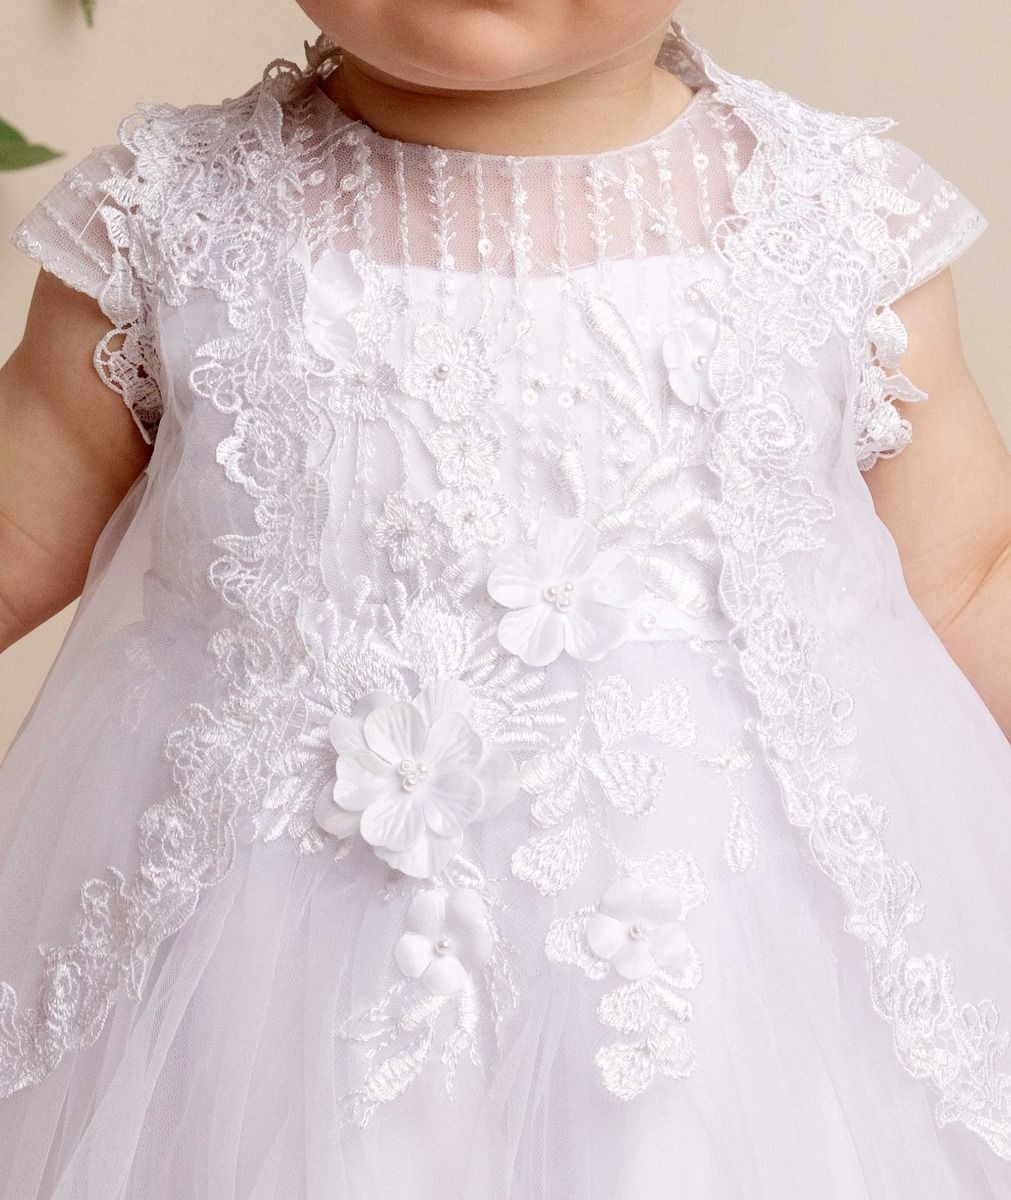 Baby Girls White Tulle & Lace Christening Dress - BONNIE